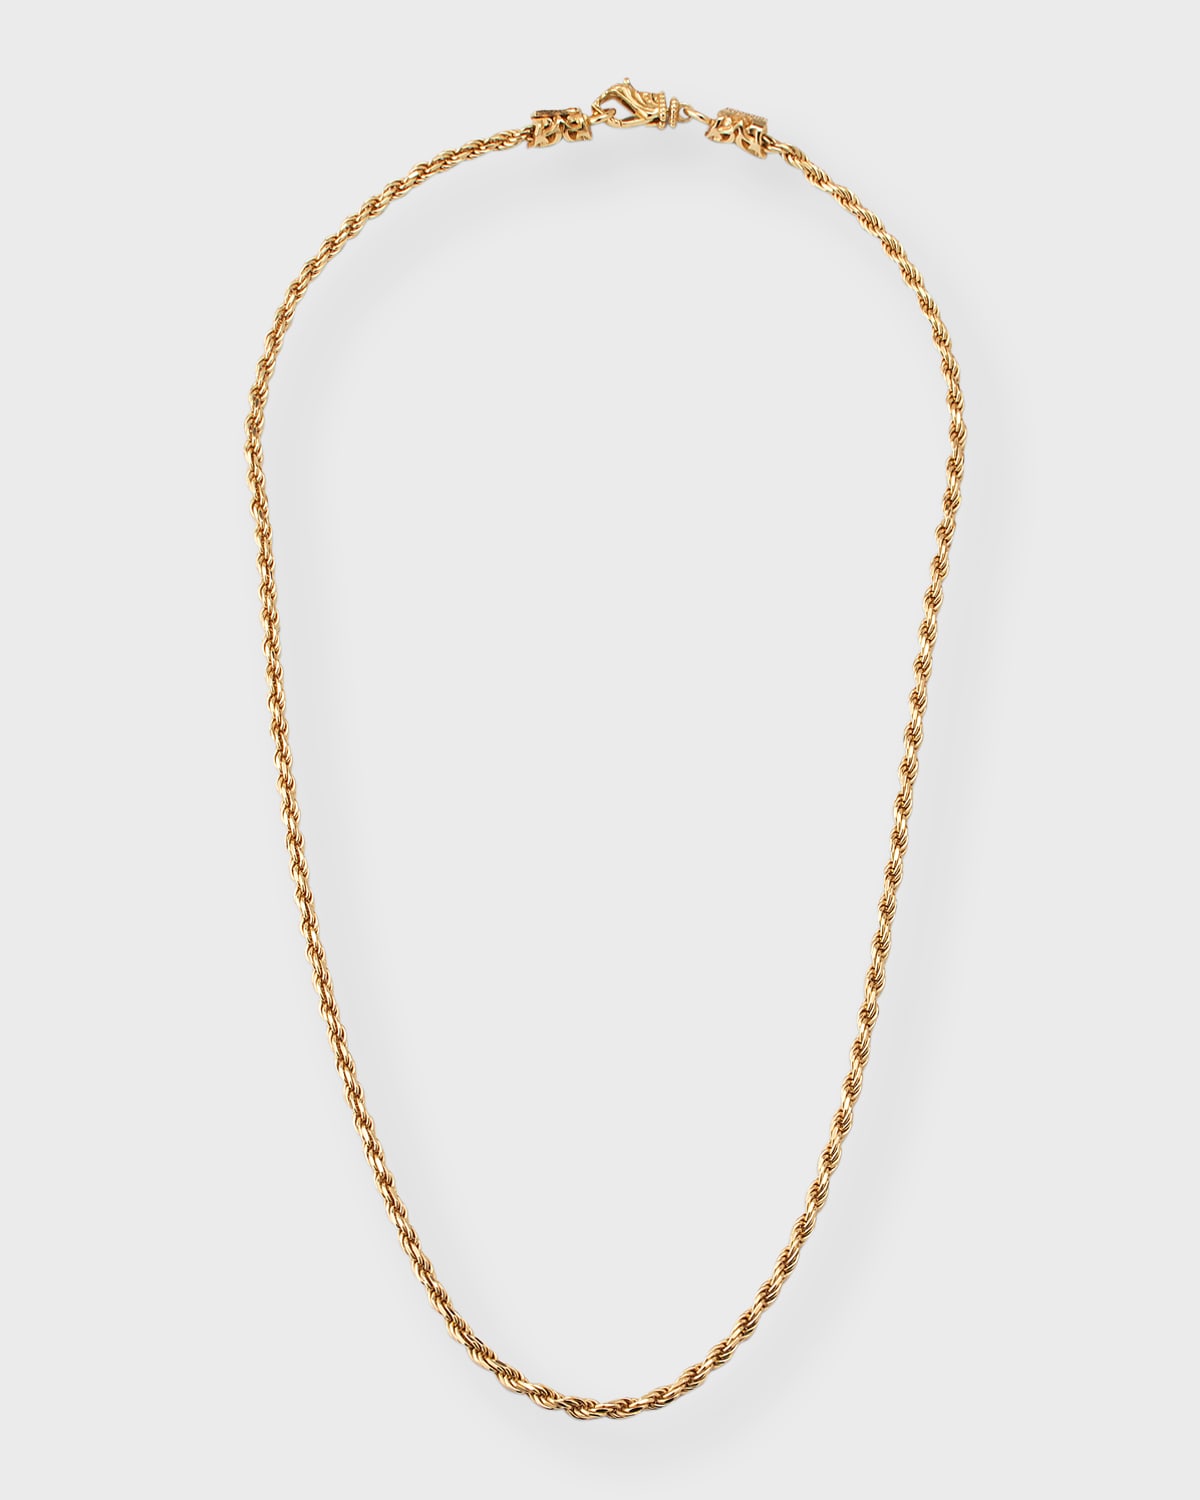 EMANUELE BICOCCHI MEN'S 24K GOLD-PLATED THIN ROPE CHAIN NECKLACE